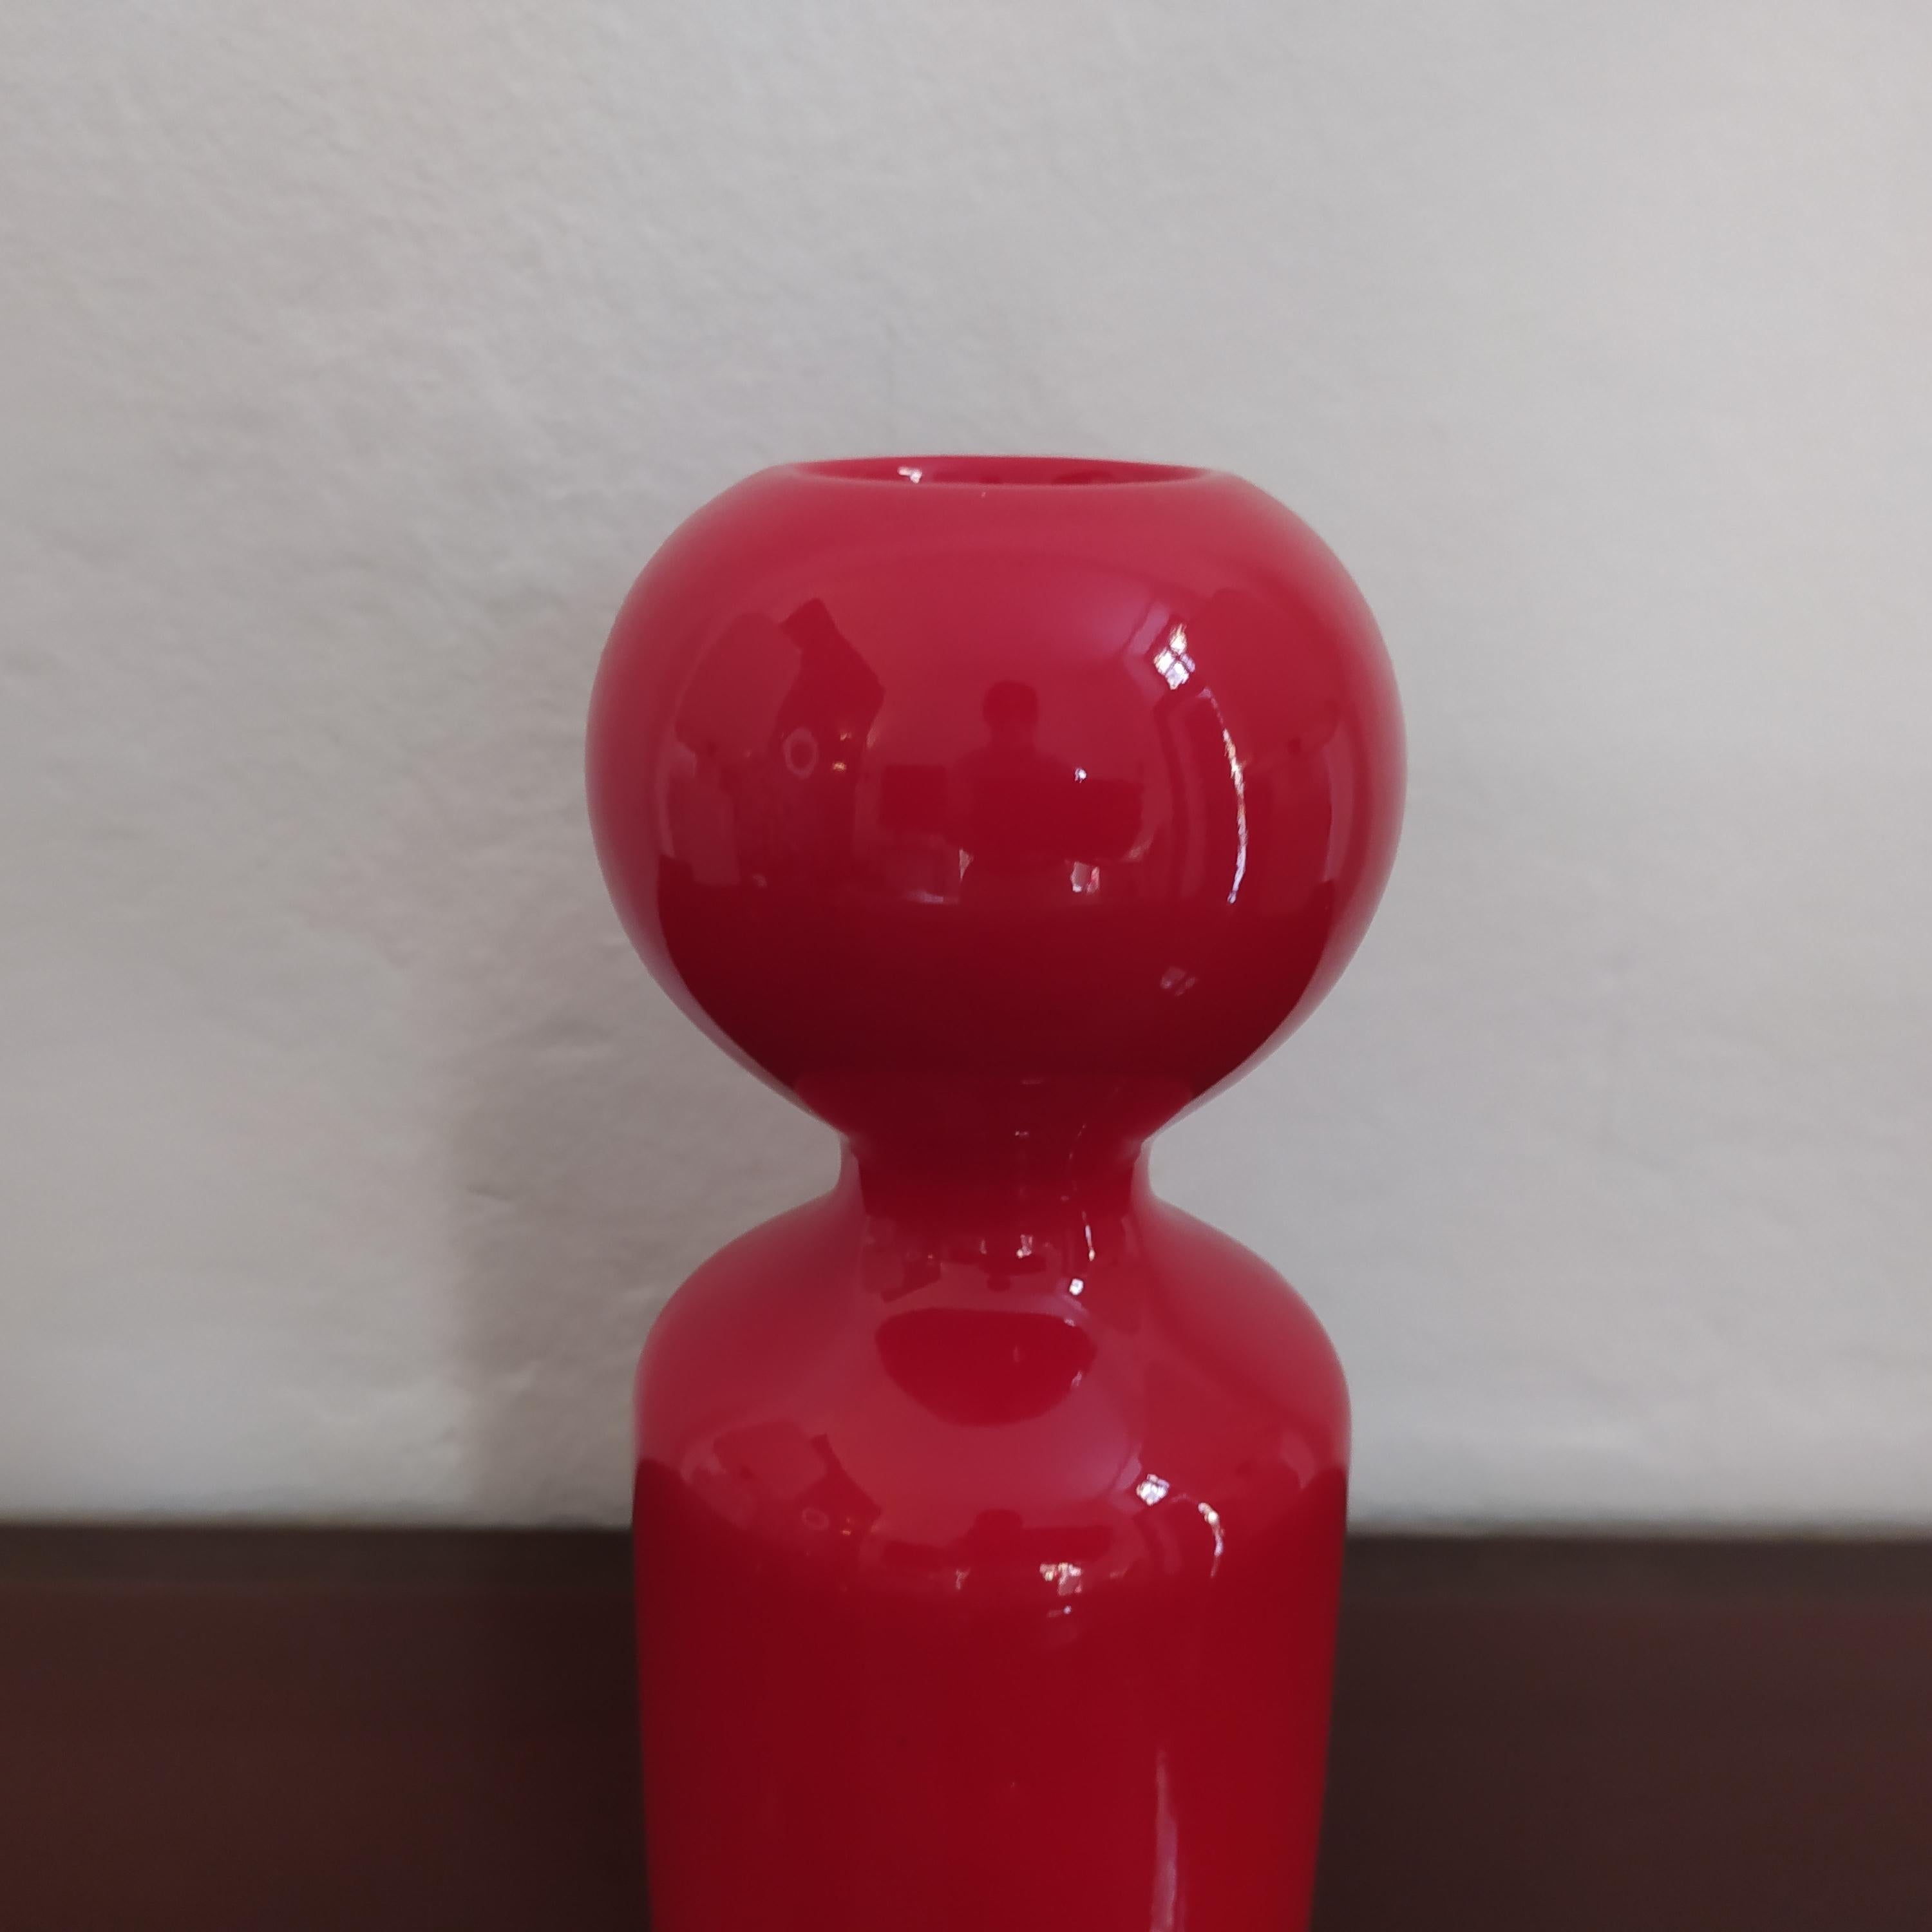 European 1970s Astonishing Space Age Red Vase by Gabbianelli, Made in Italy For Sale